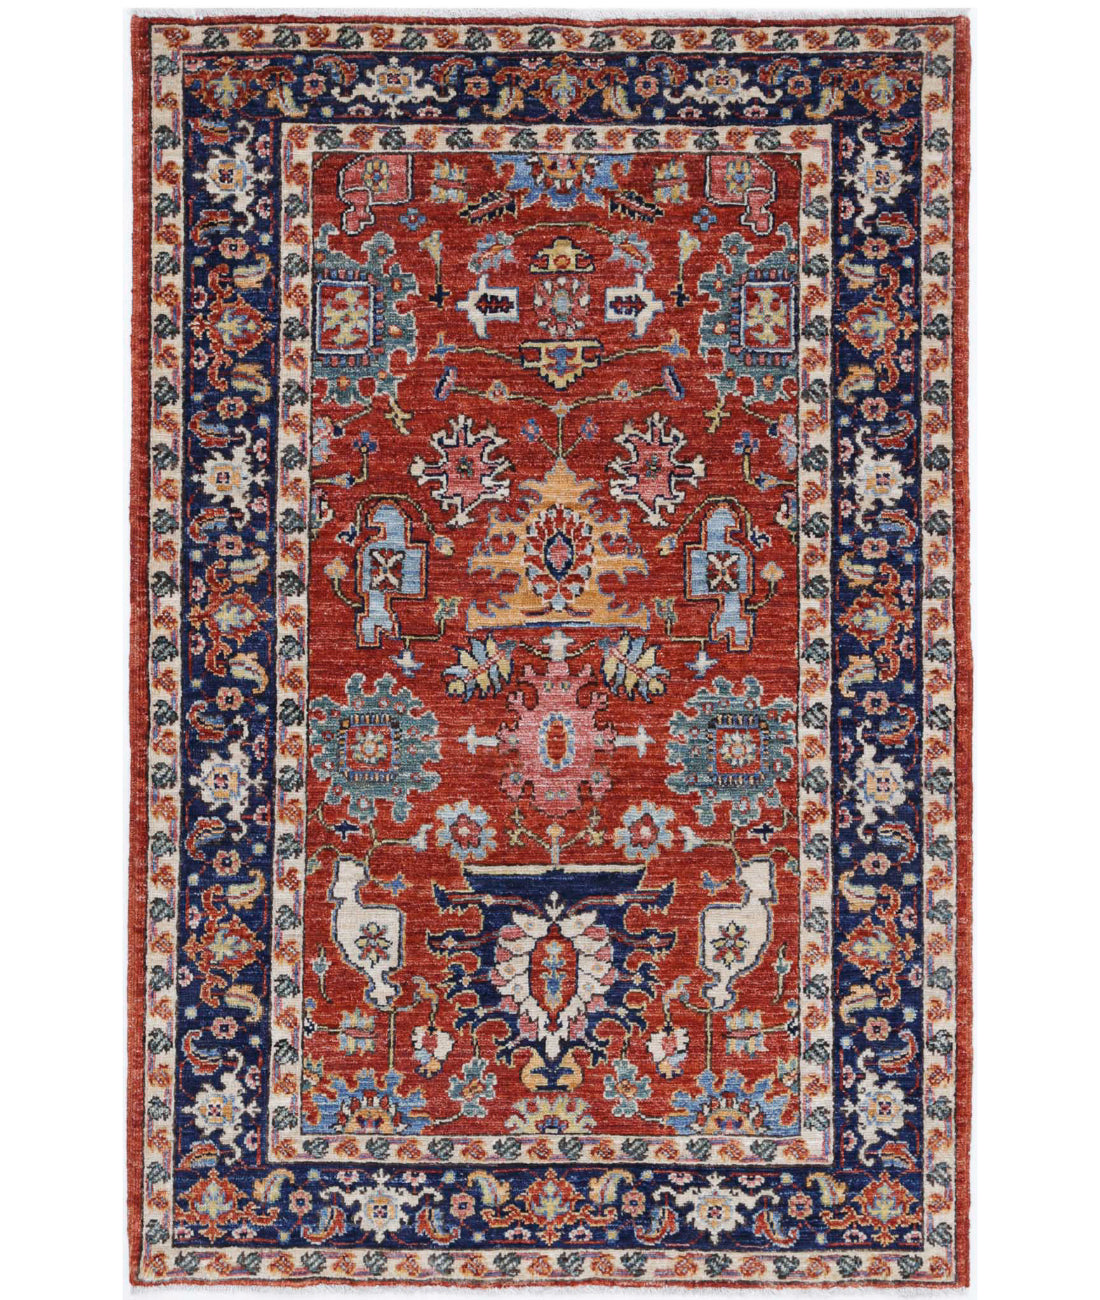 Hand Knotted Nomadic Caucasian Humna Wool Rug - 3'2'' x 4'10'' 3'2'' x 4'10'' (95 X 145) / Rust / Blue